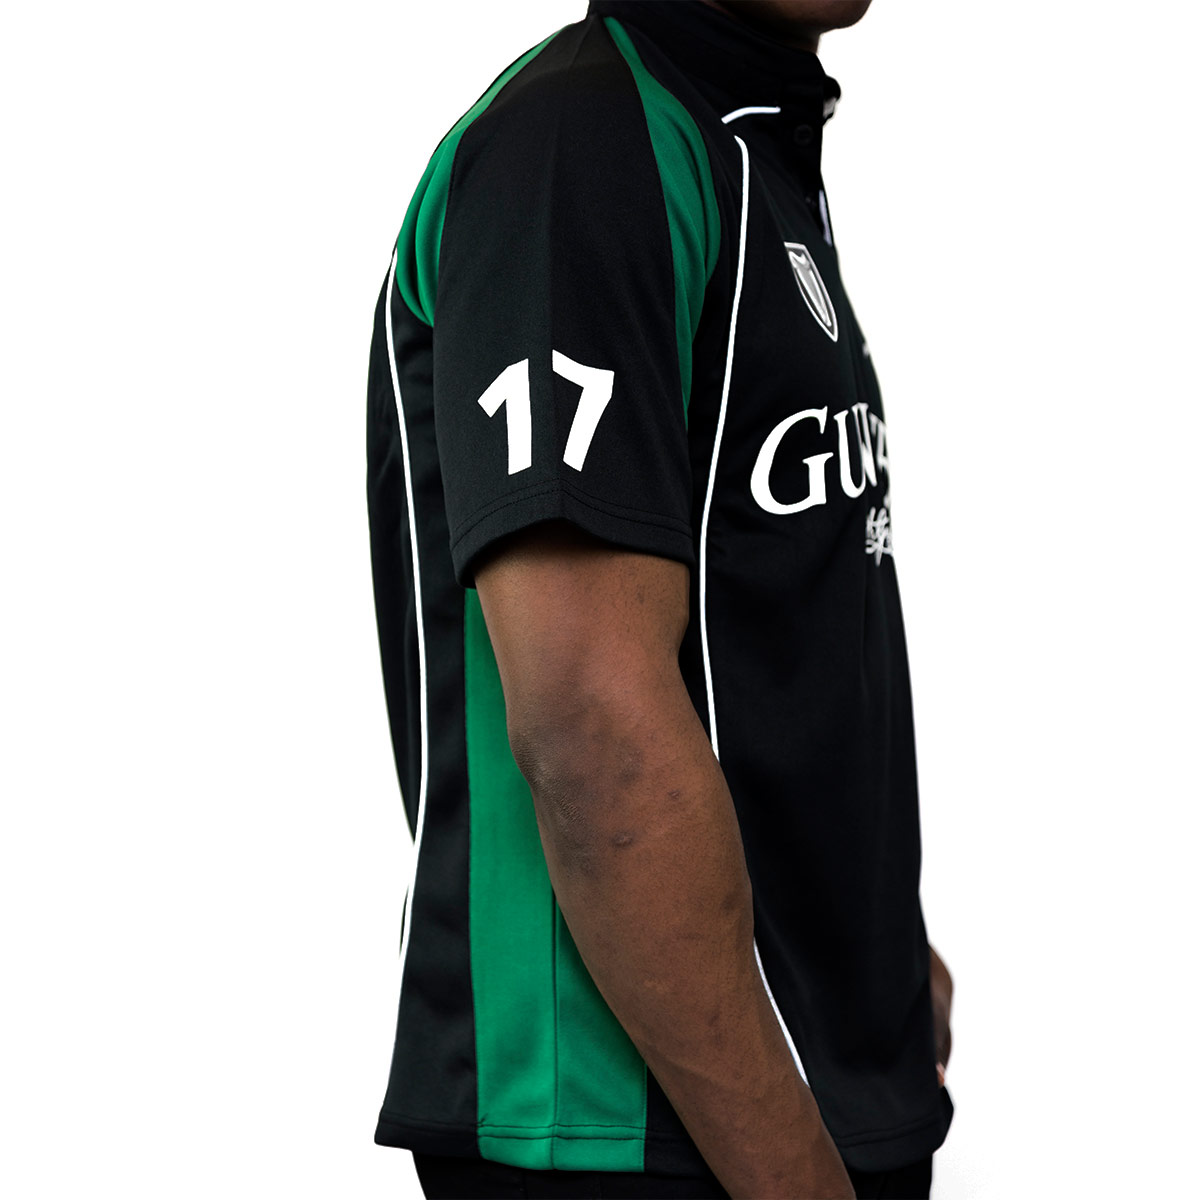 Product image for Irish Shirt | Guinness Black & Green Short Sleeve Rugby Jersey